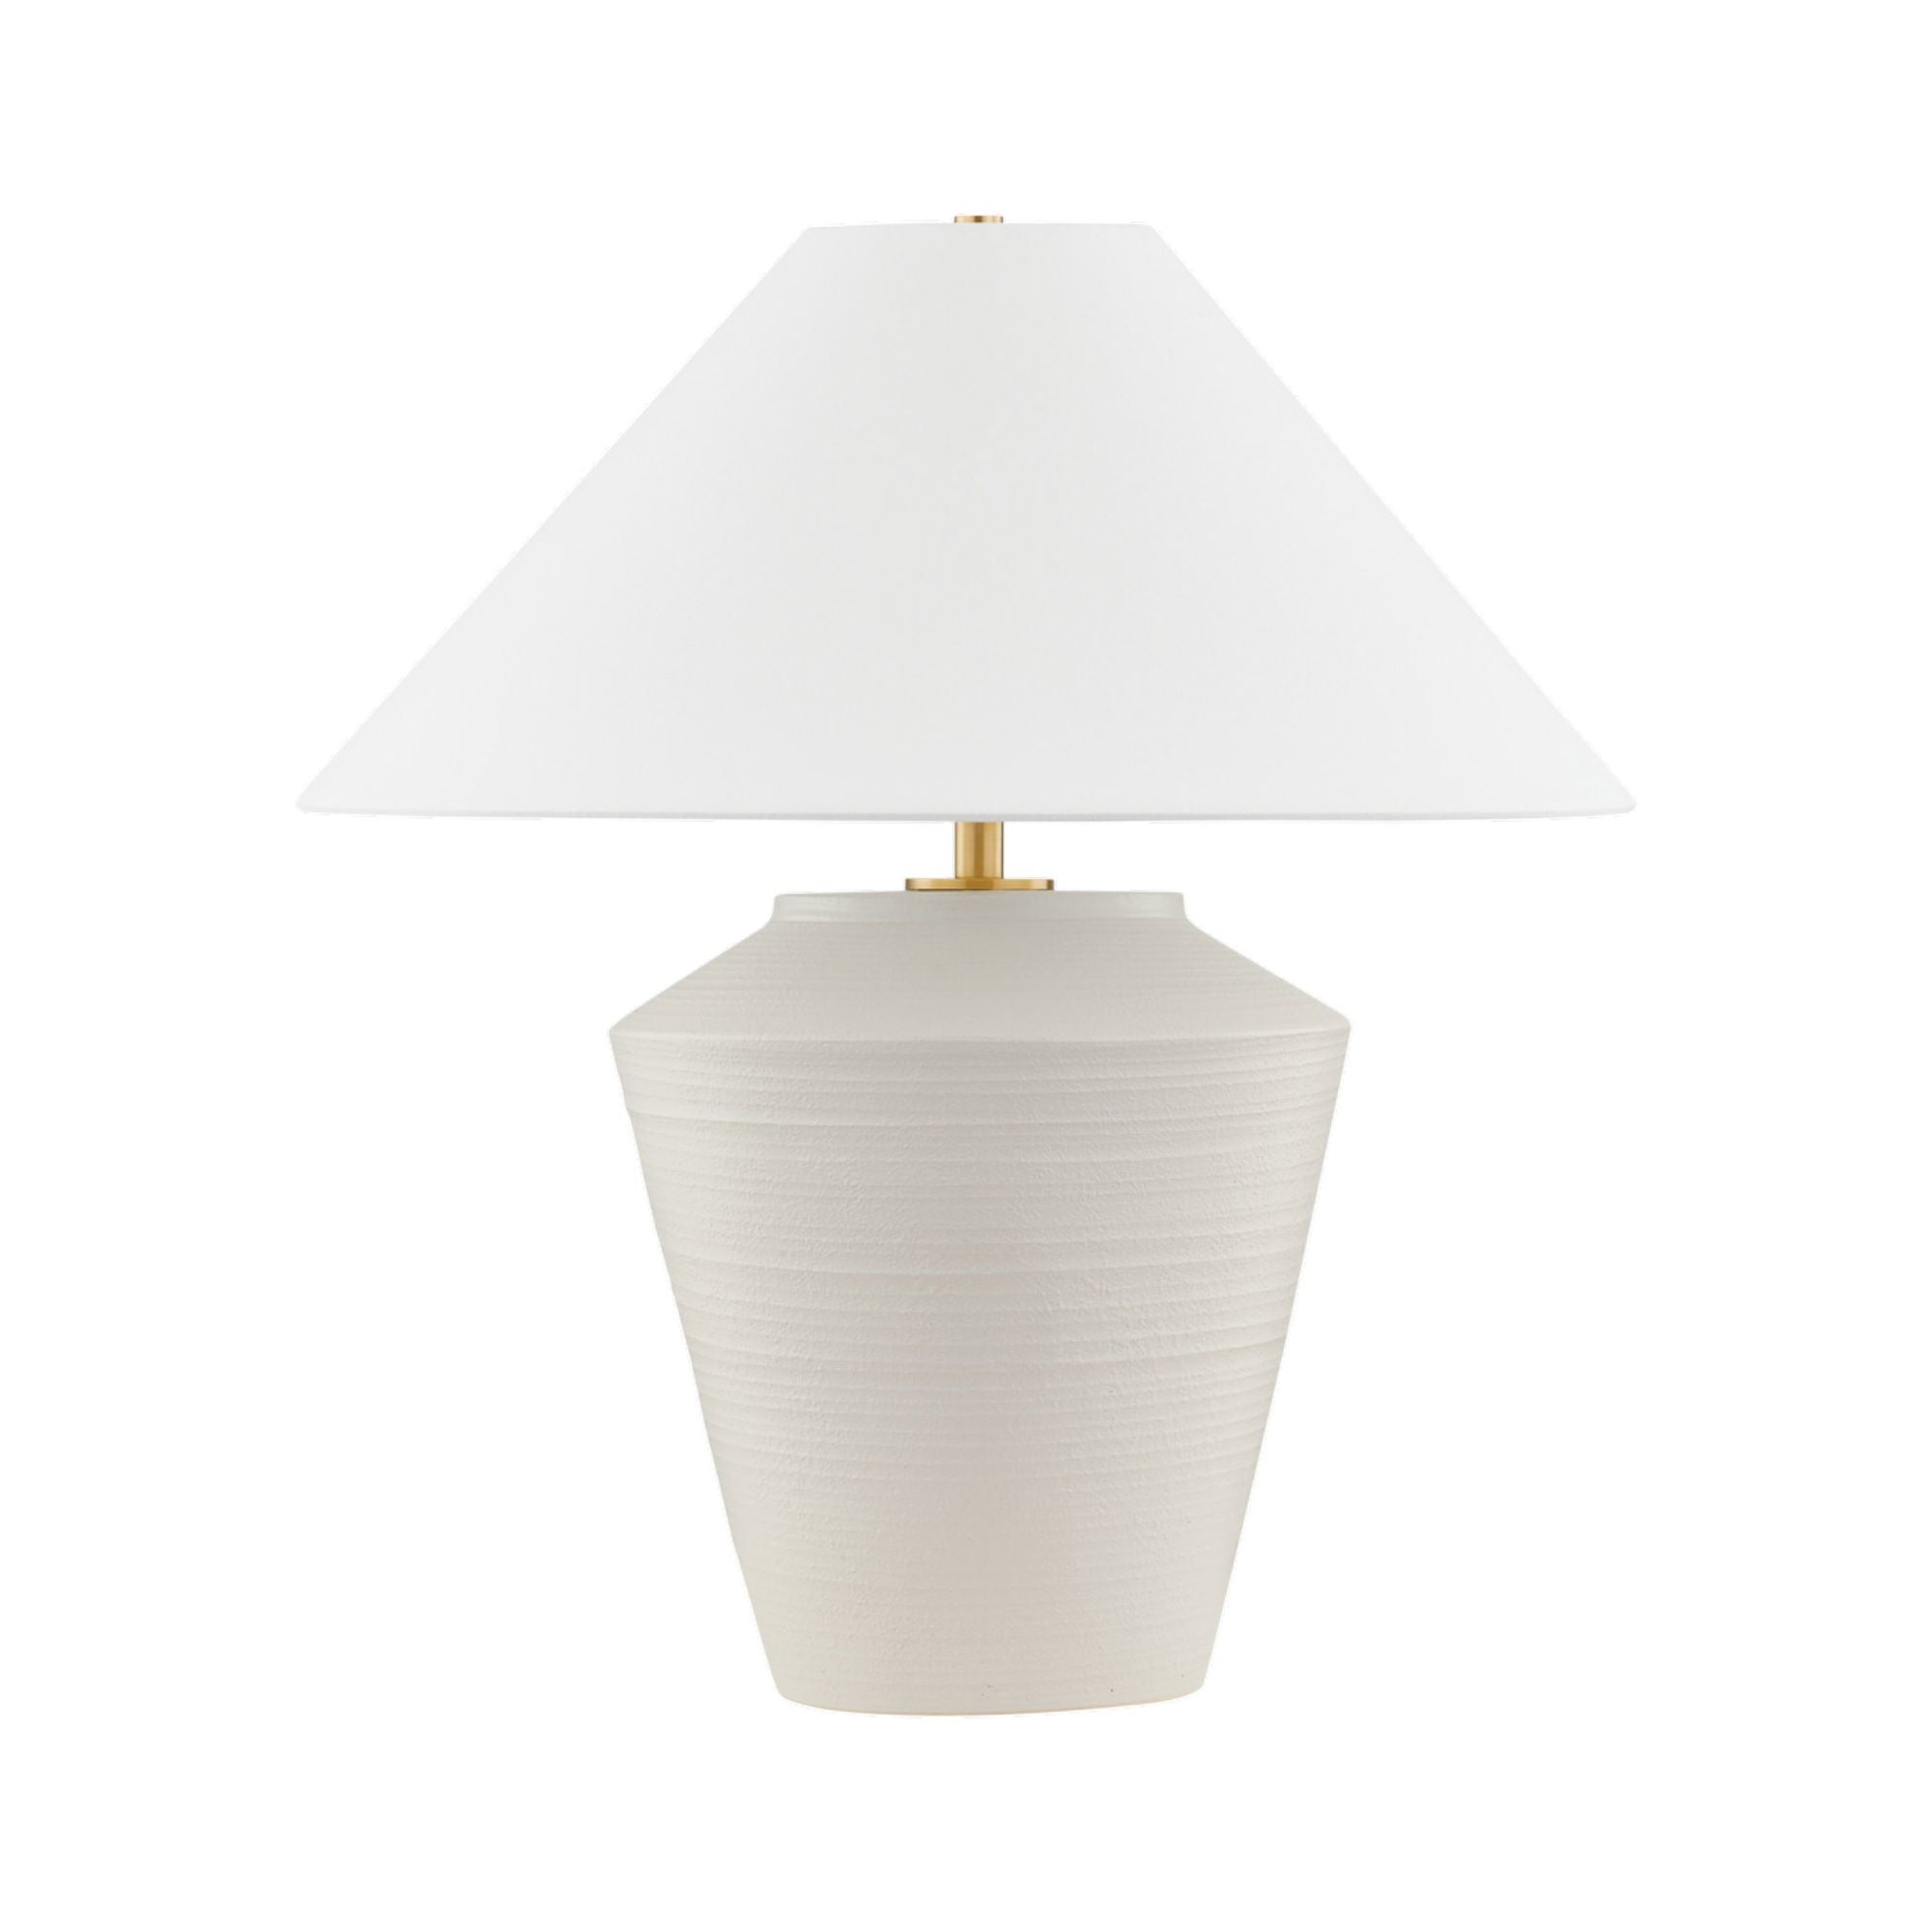 Rachie 1-Light Table Lamp in Aged Brass/ Ceramic Whitewash Terracotta by The Lifestyled Co